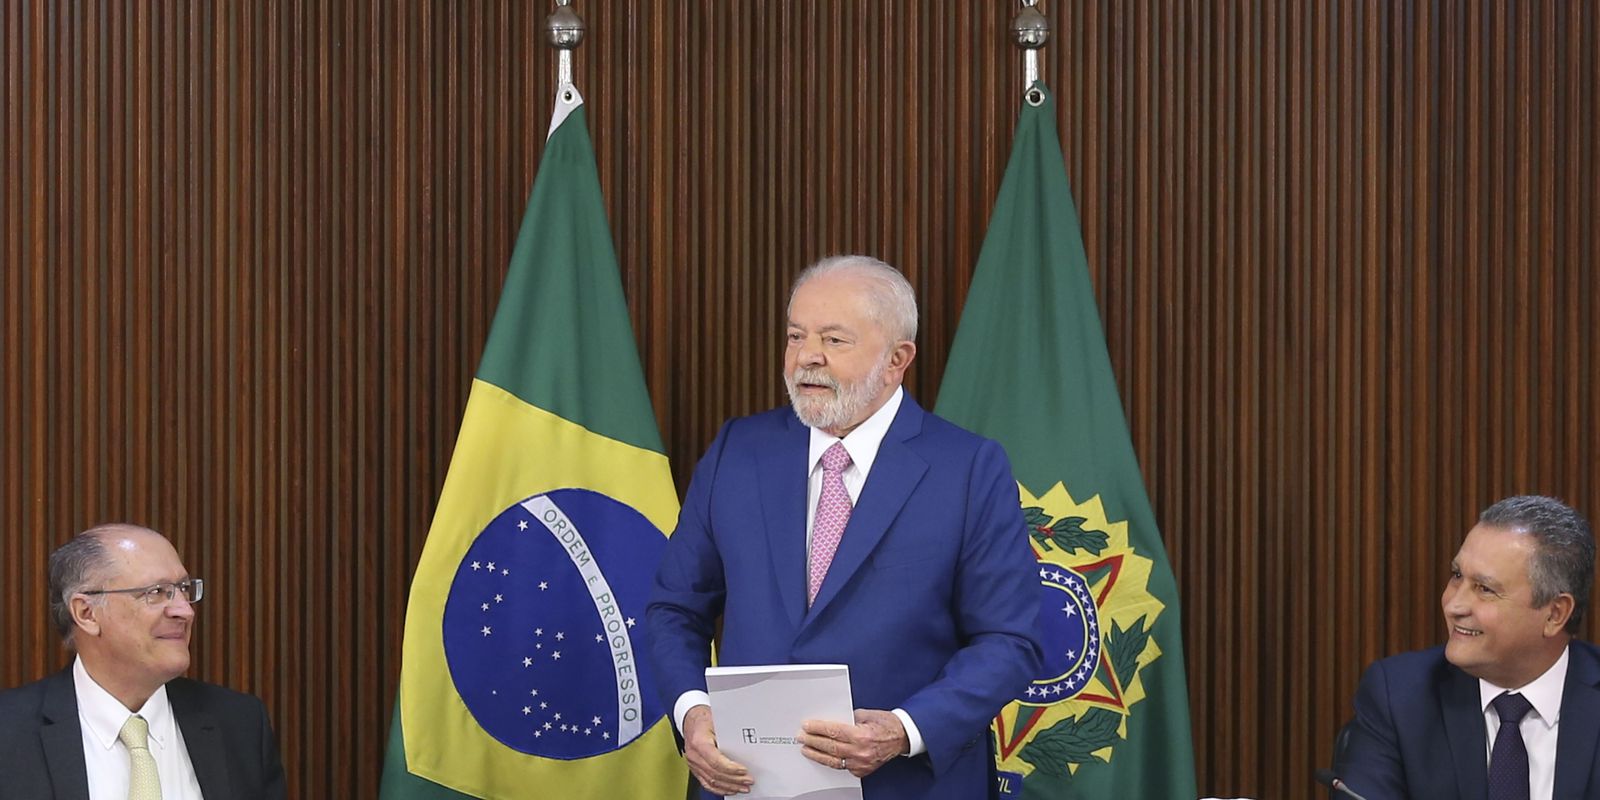 Lula says he will have the most important relationship with the National Congress